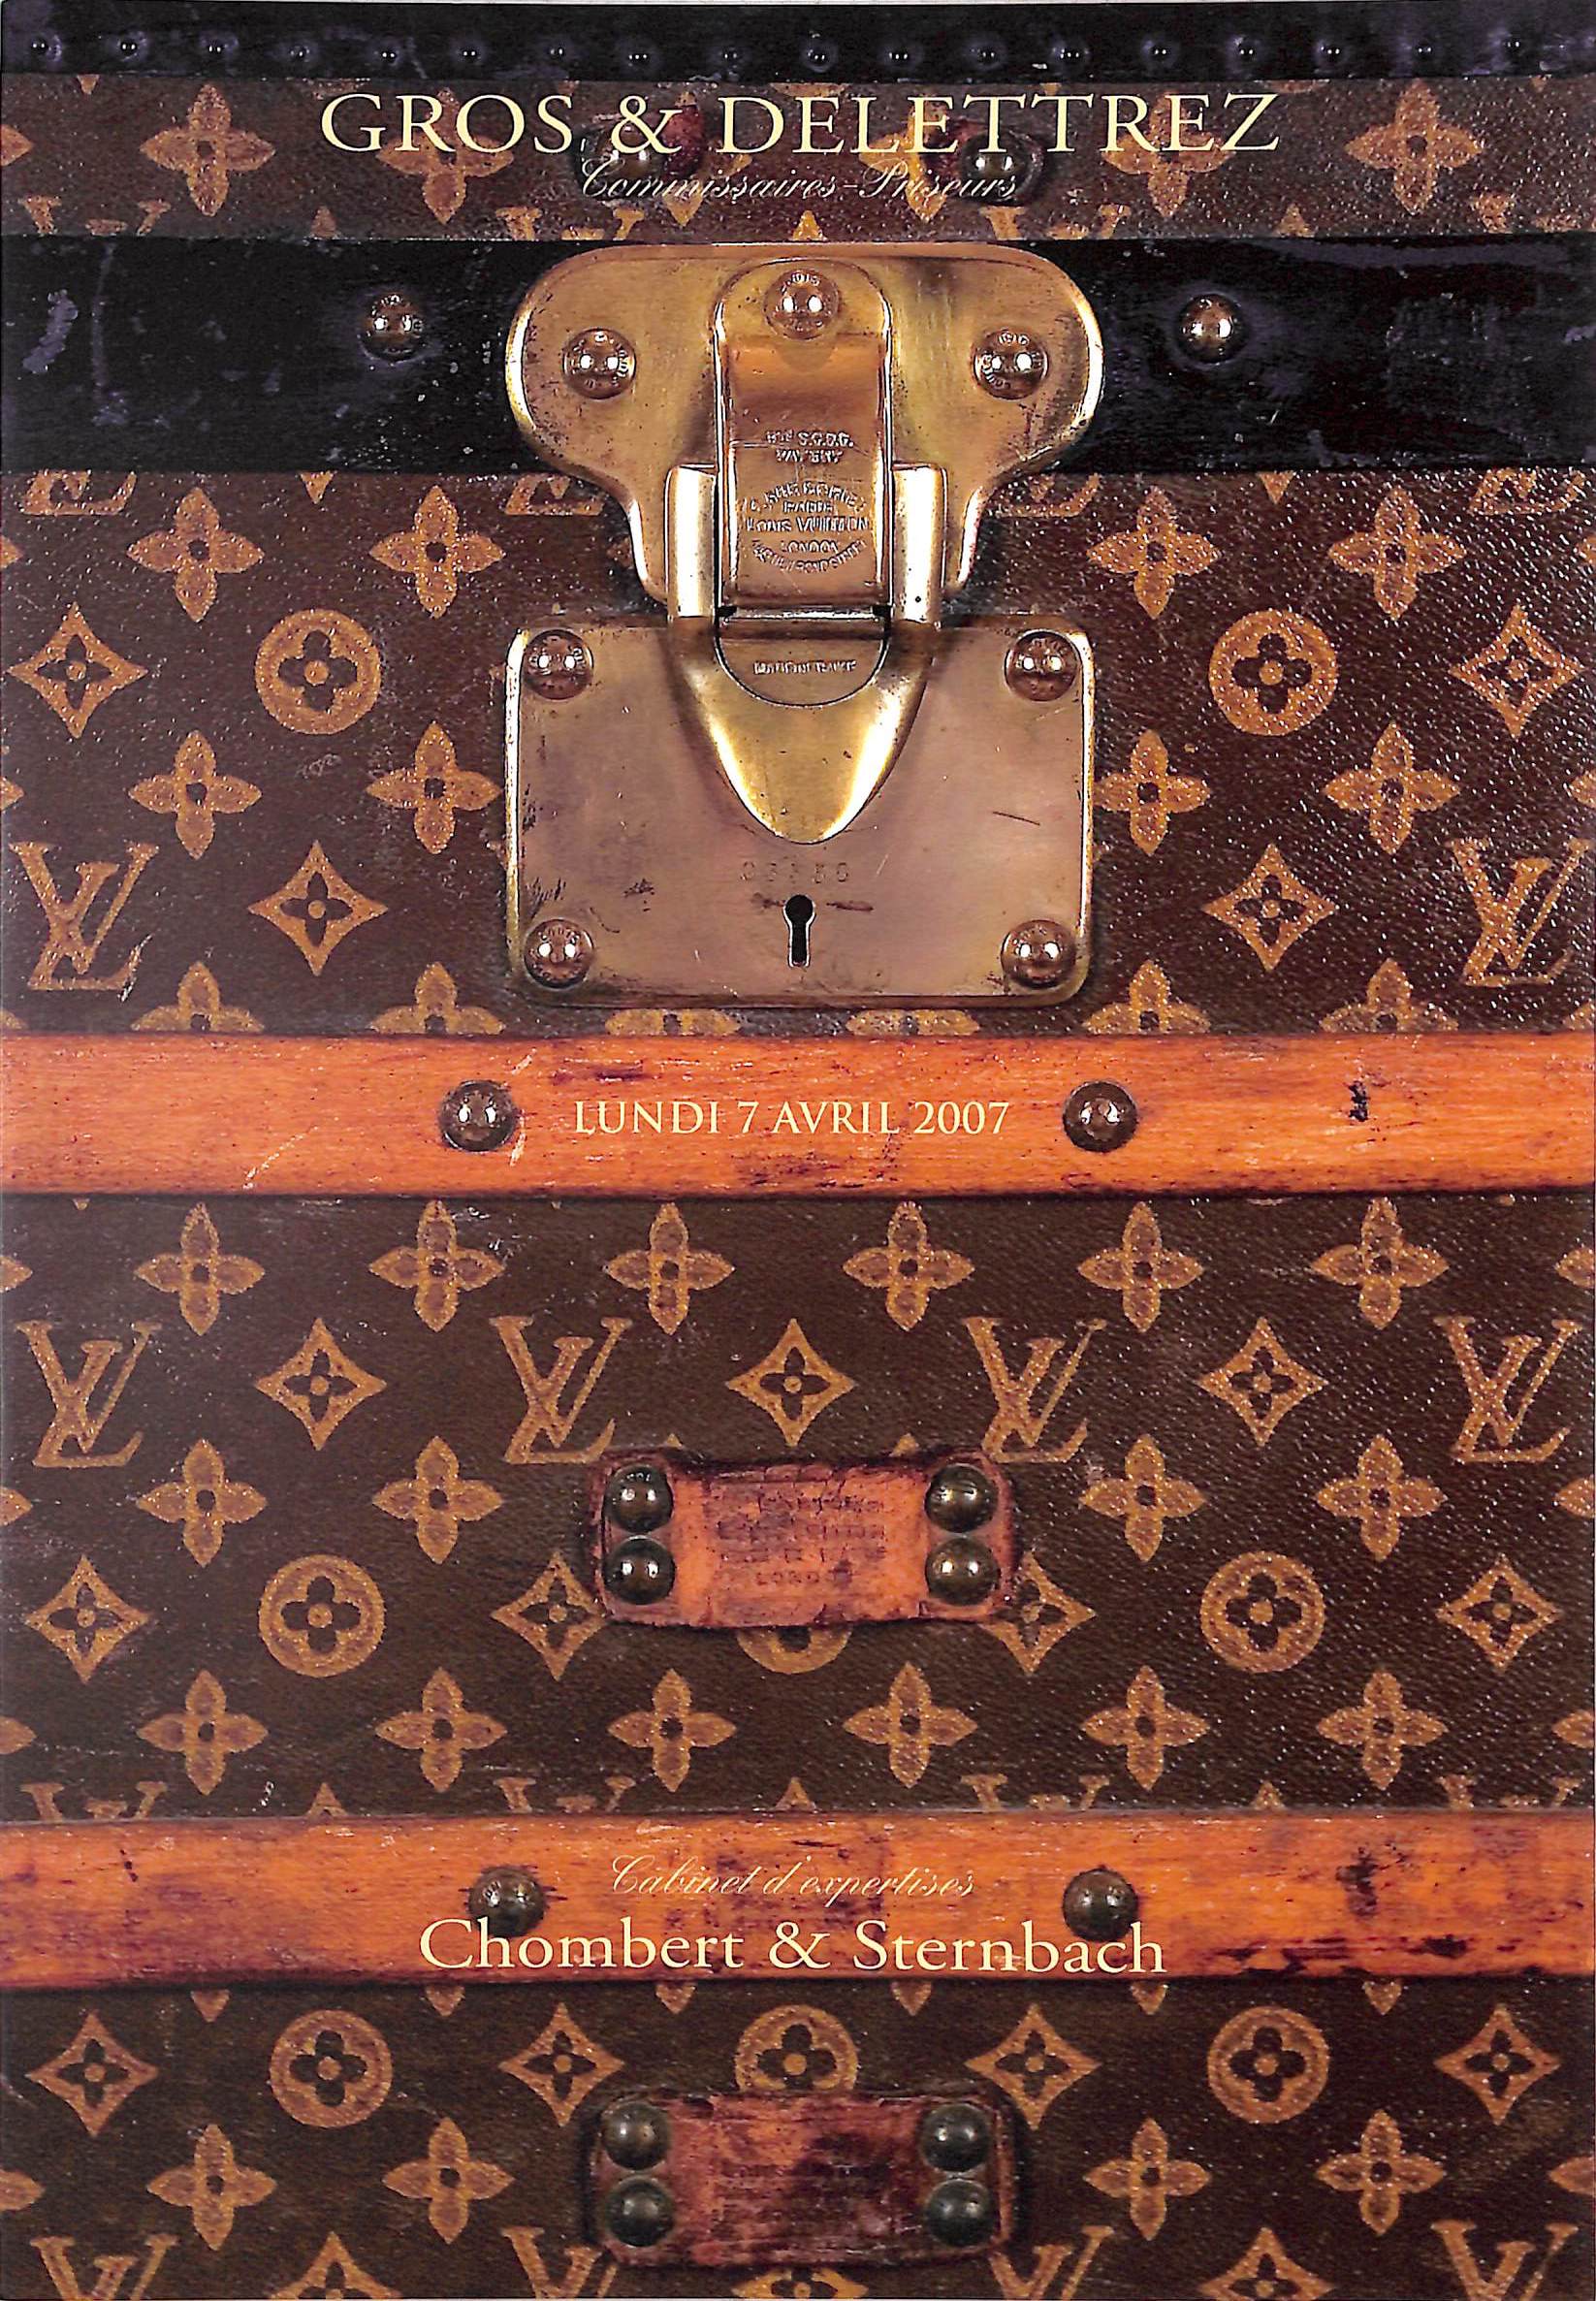 Sold at Auction: Vintage Louis Vuitton Luggage Trunk